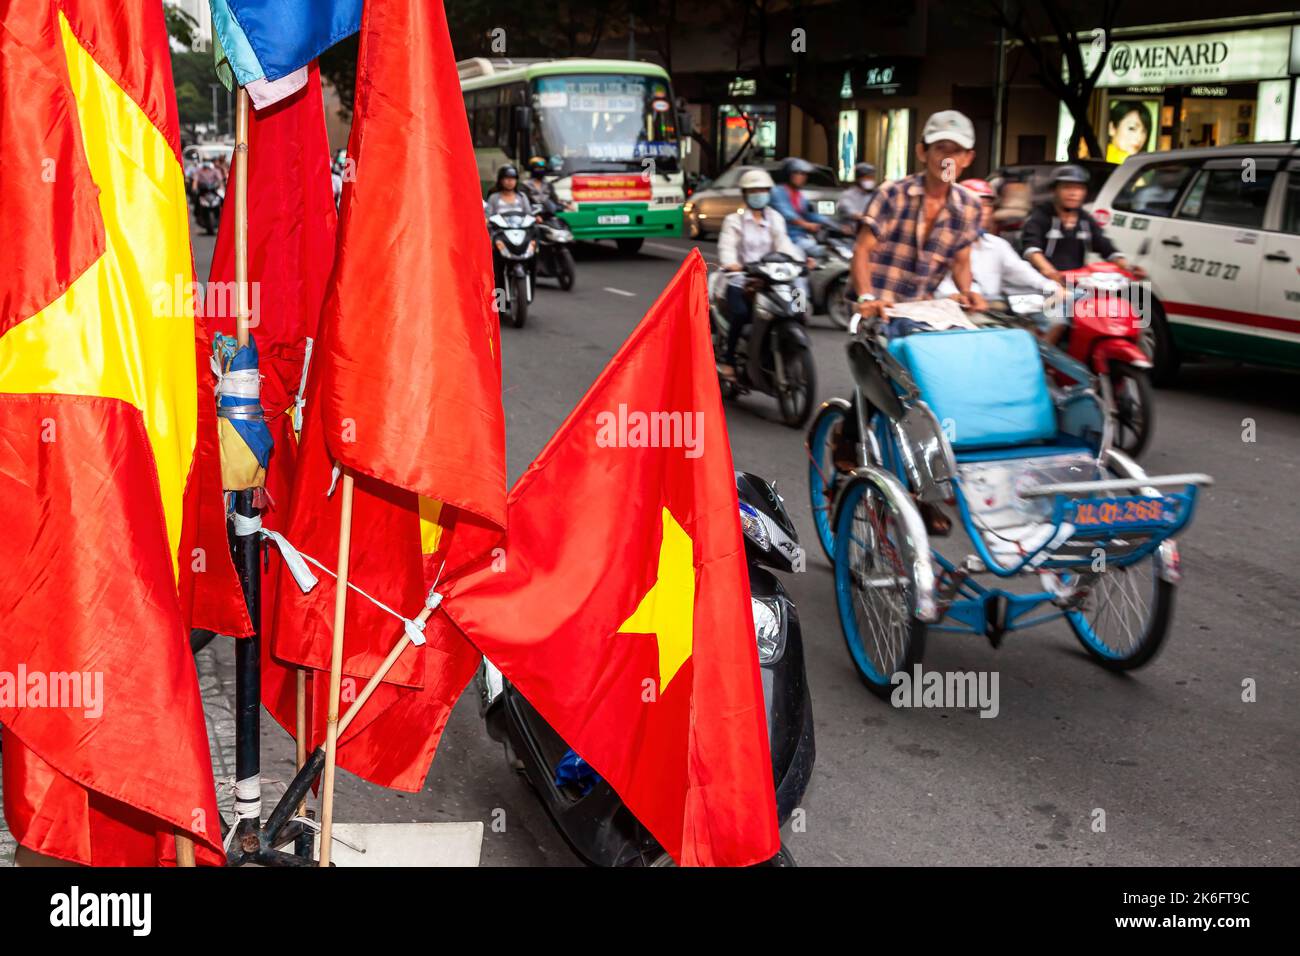 Traffic and flags on the street in central Ho Chi Minh City, Vietnam Stock Photo